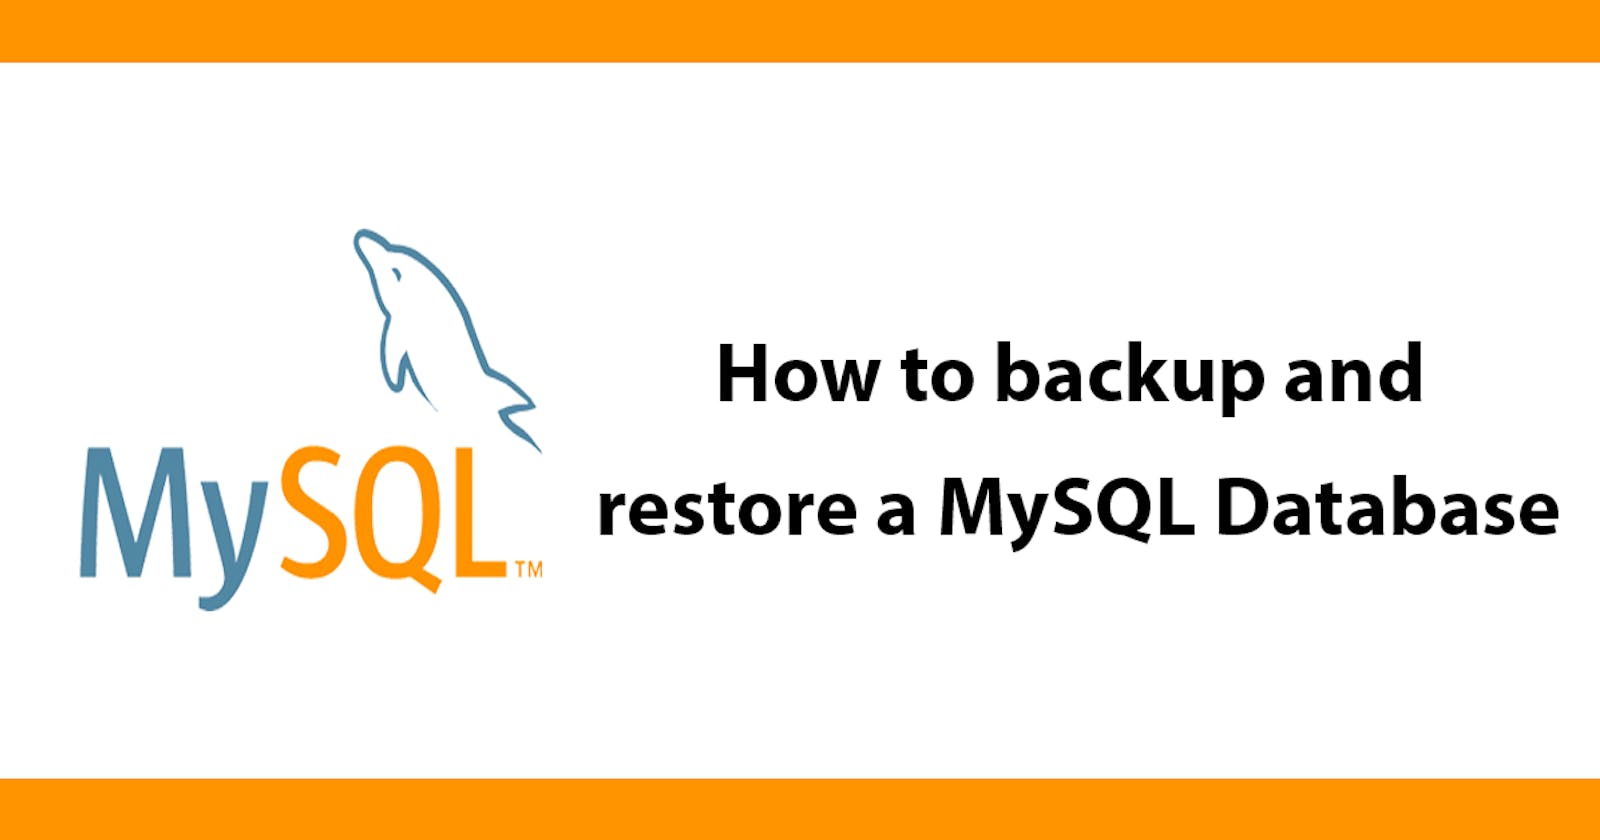 How to backup and restore a MySQL Database